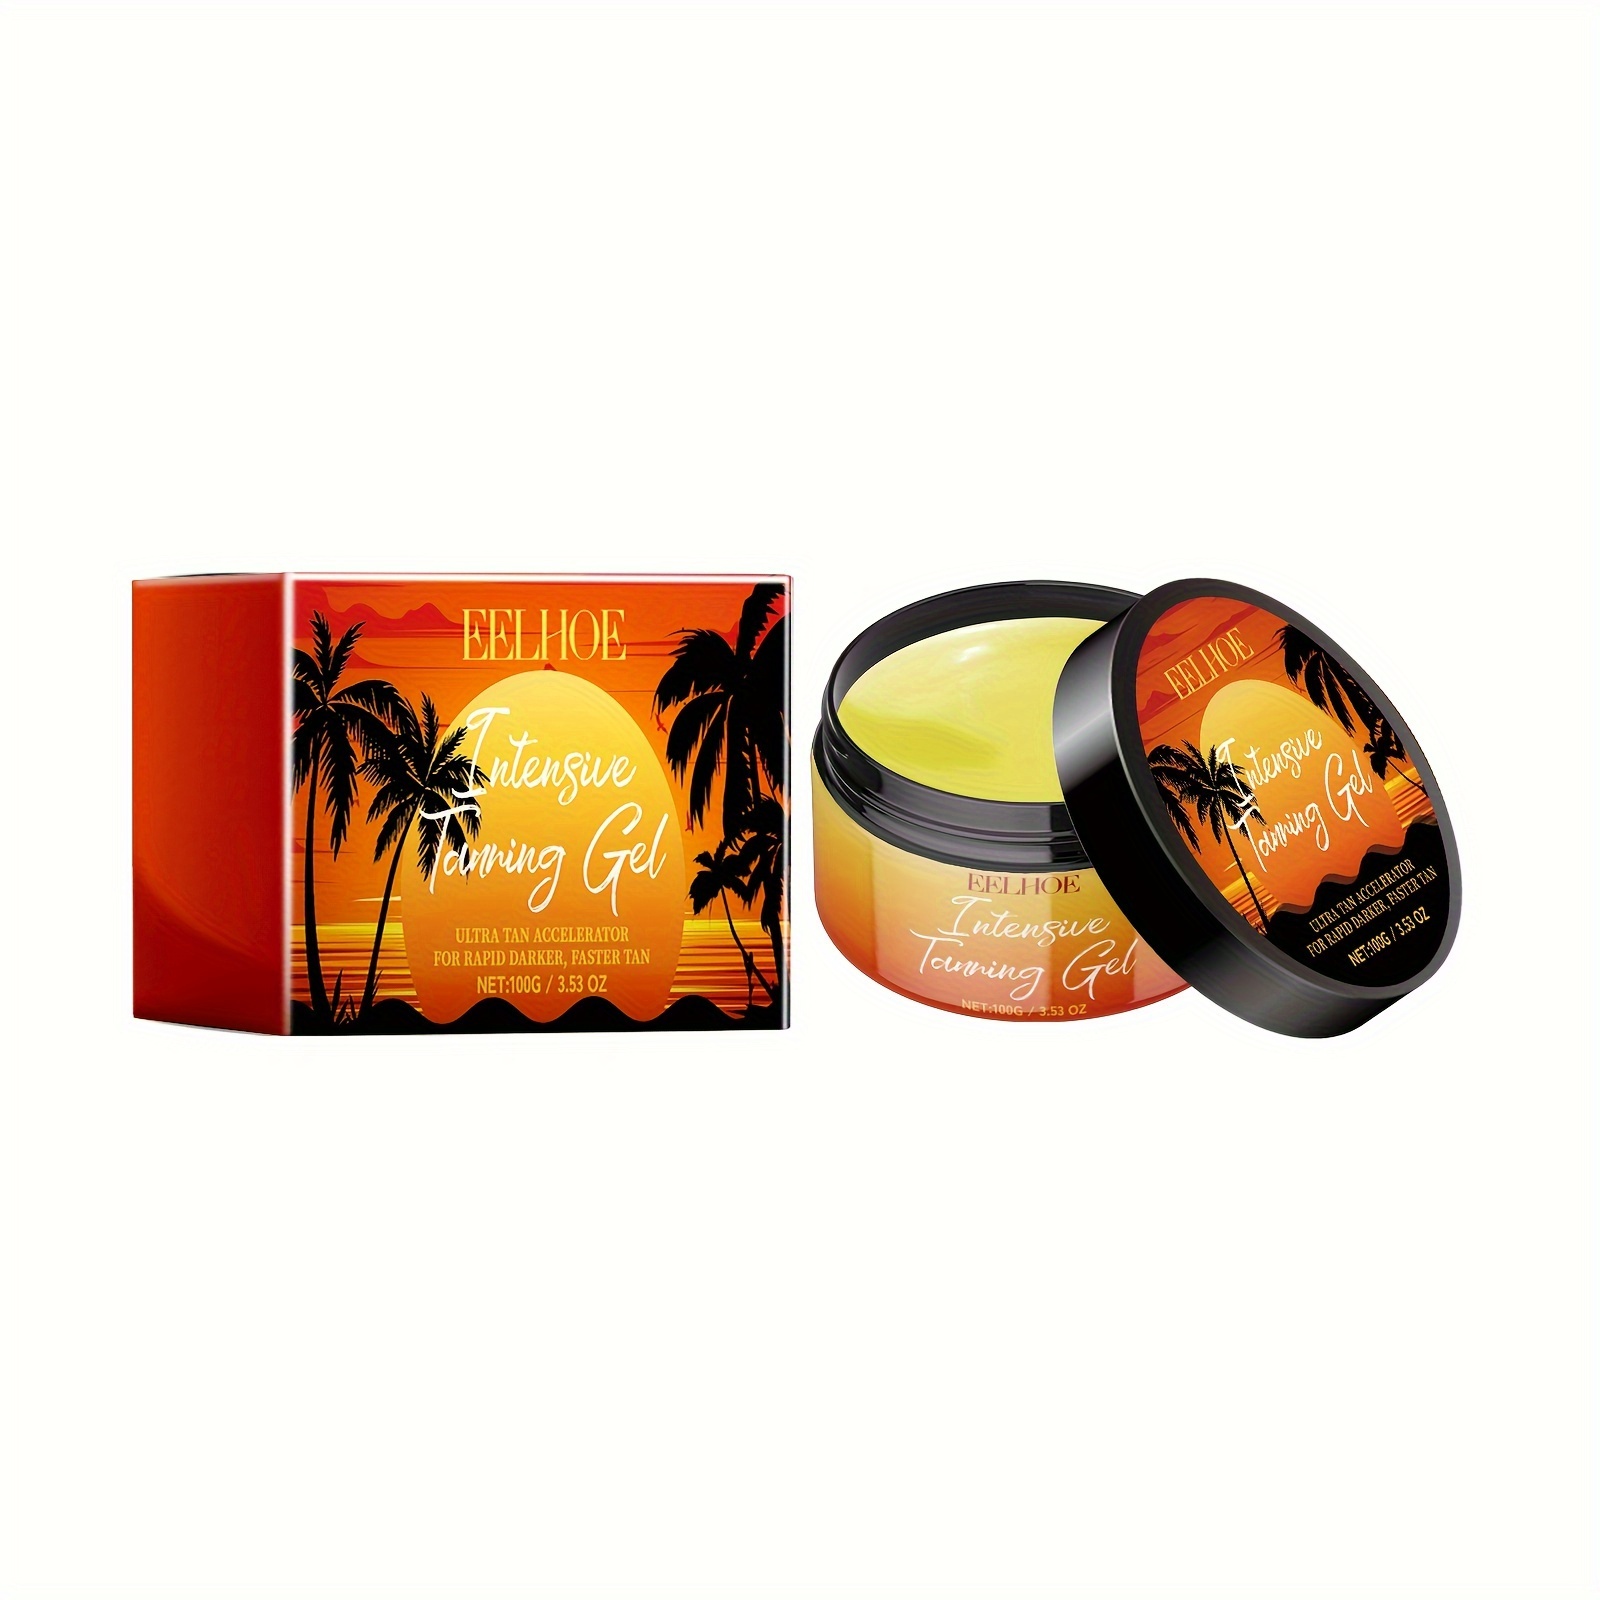 

Intensive Tanning Gel, 100g, Quick Sun-kissed Bronze Look, Natural And Refreshing Moisturization, Suitable For Summer Beach Use On Arms, Underarms, Back, Face, Legs, And Feet